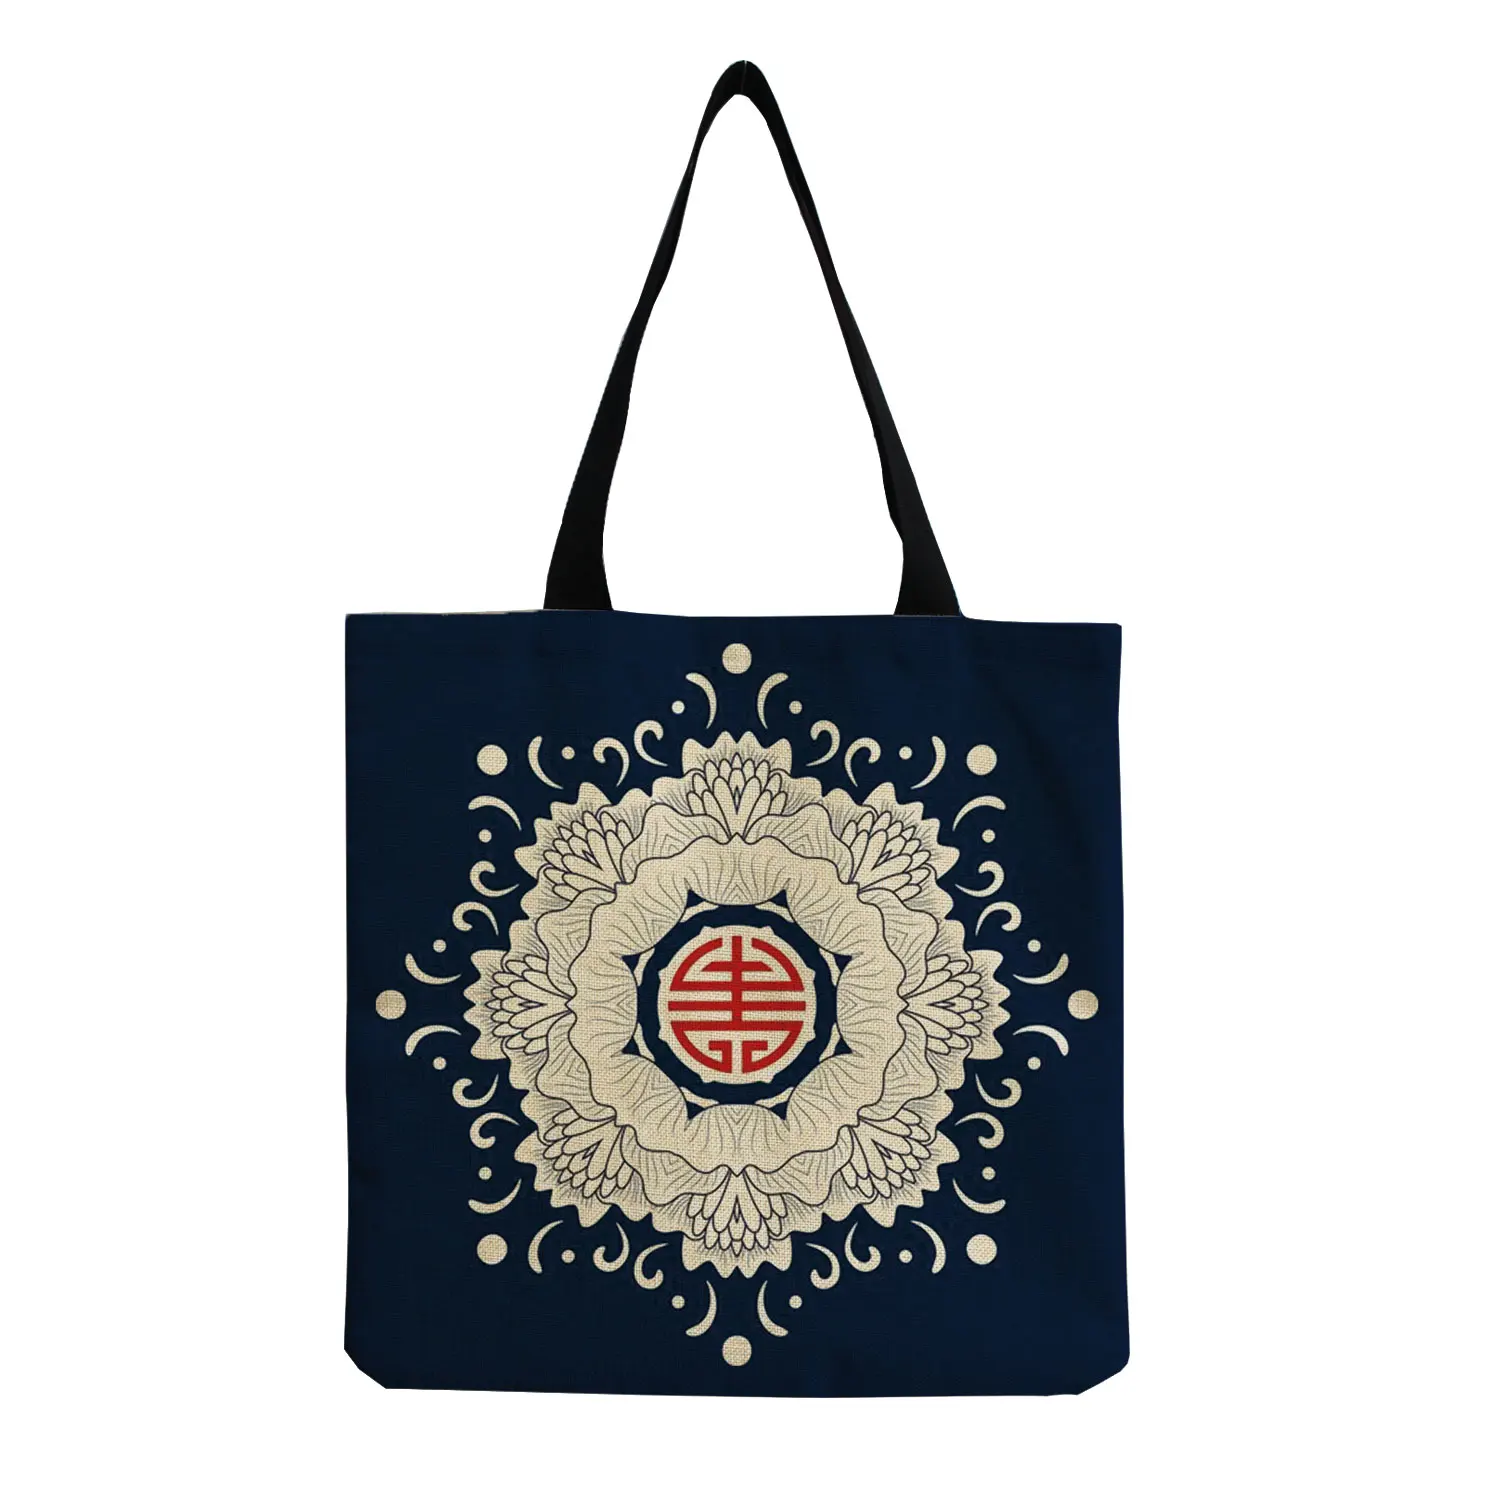 Customized Mandala Flower Tote Bags Women Eco Reusable Shopping Bag Floral Print Handbags For Lady Foldable Traveling Beach Bags 